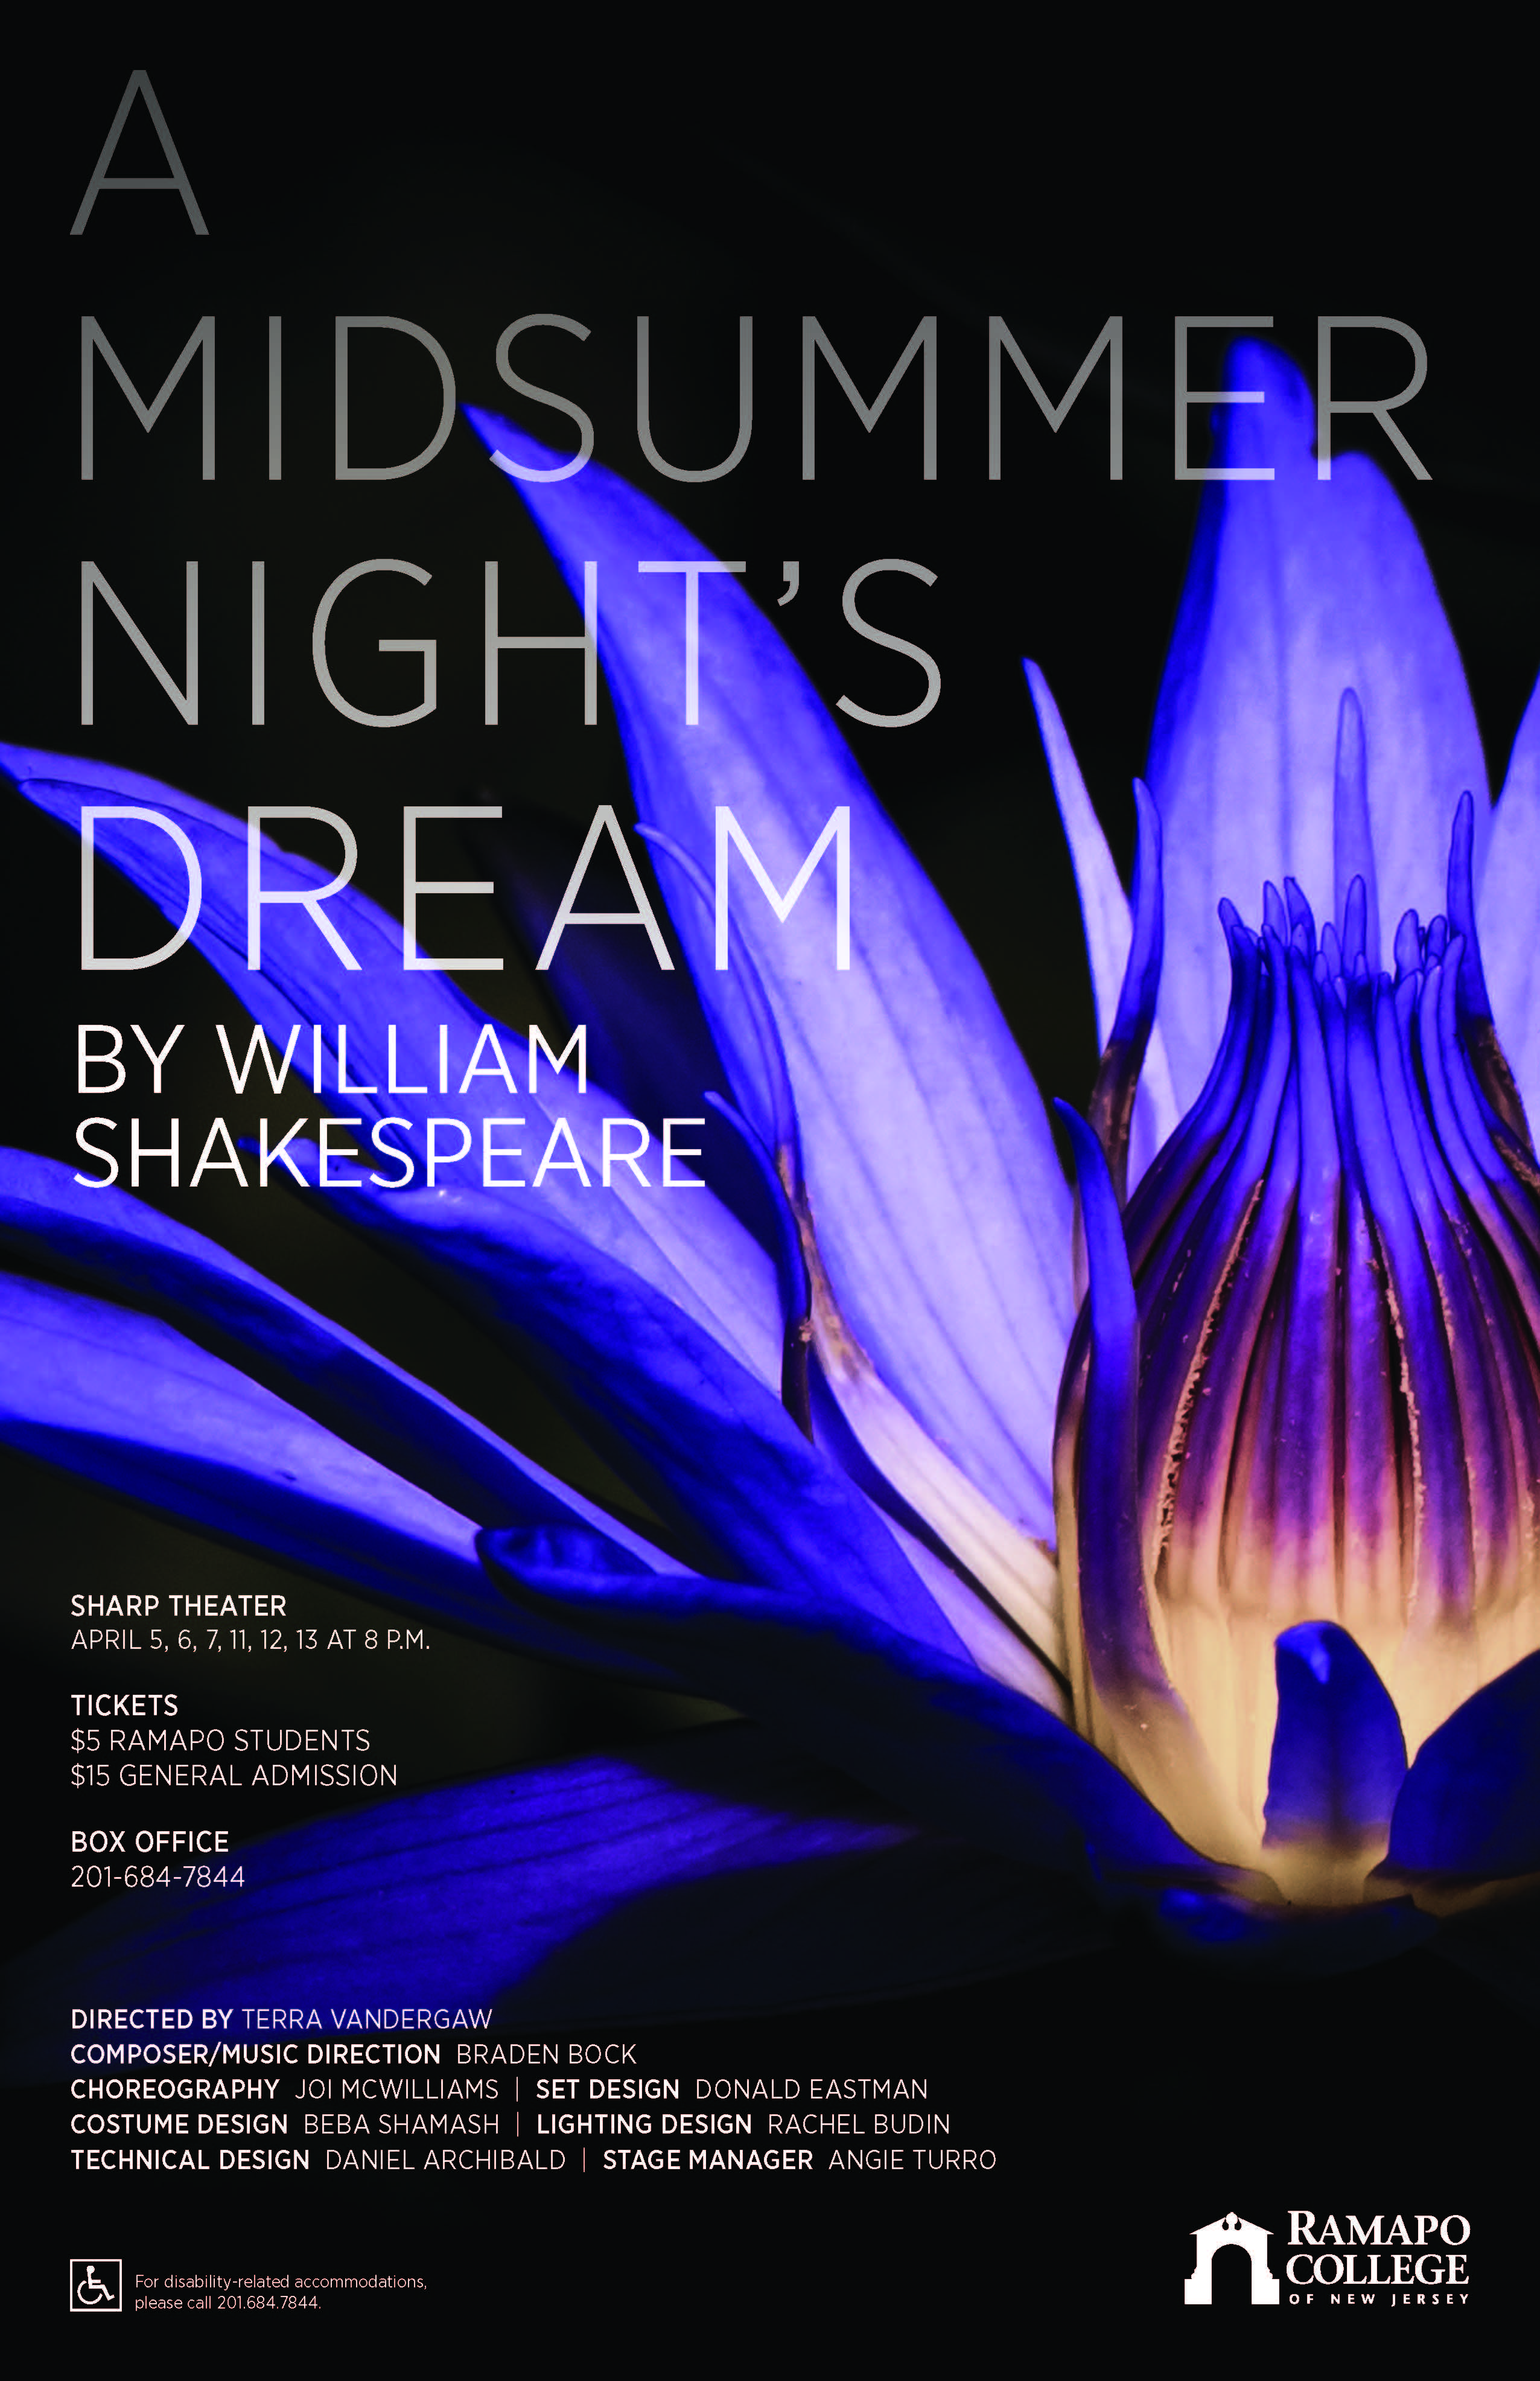 A Midsummer Nights Dream By William Shakespeare